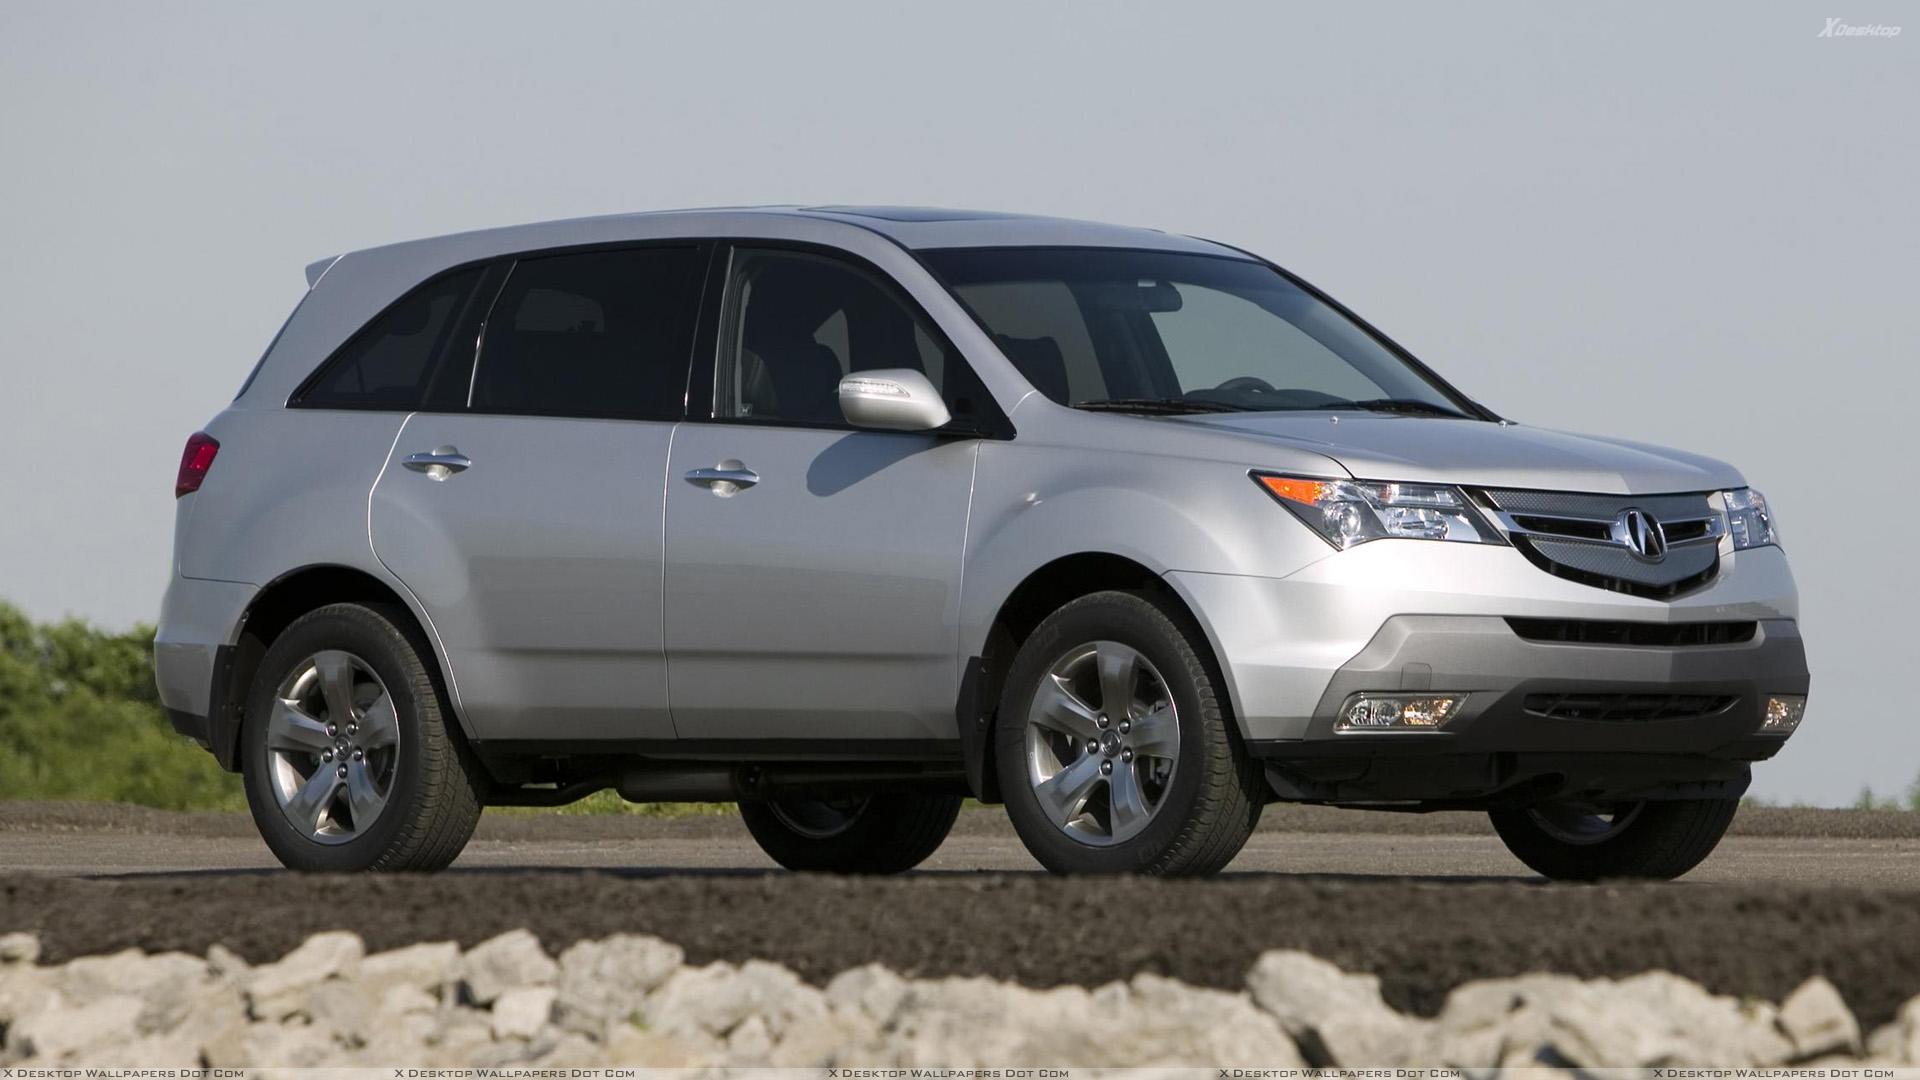 Acura MDX 005 In Silver Front Side Pose Wallpaper